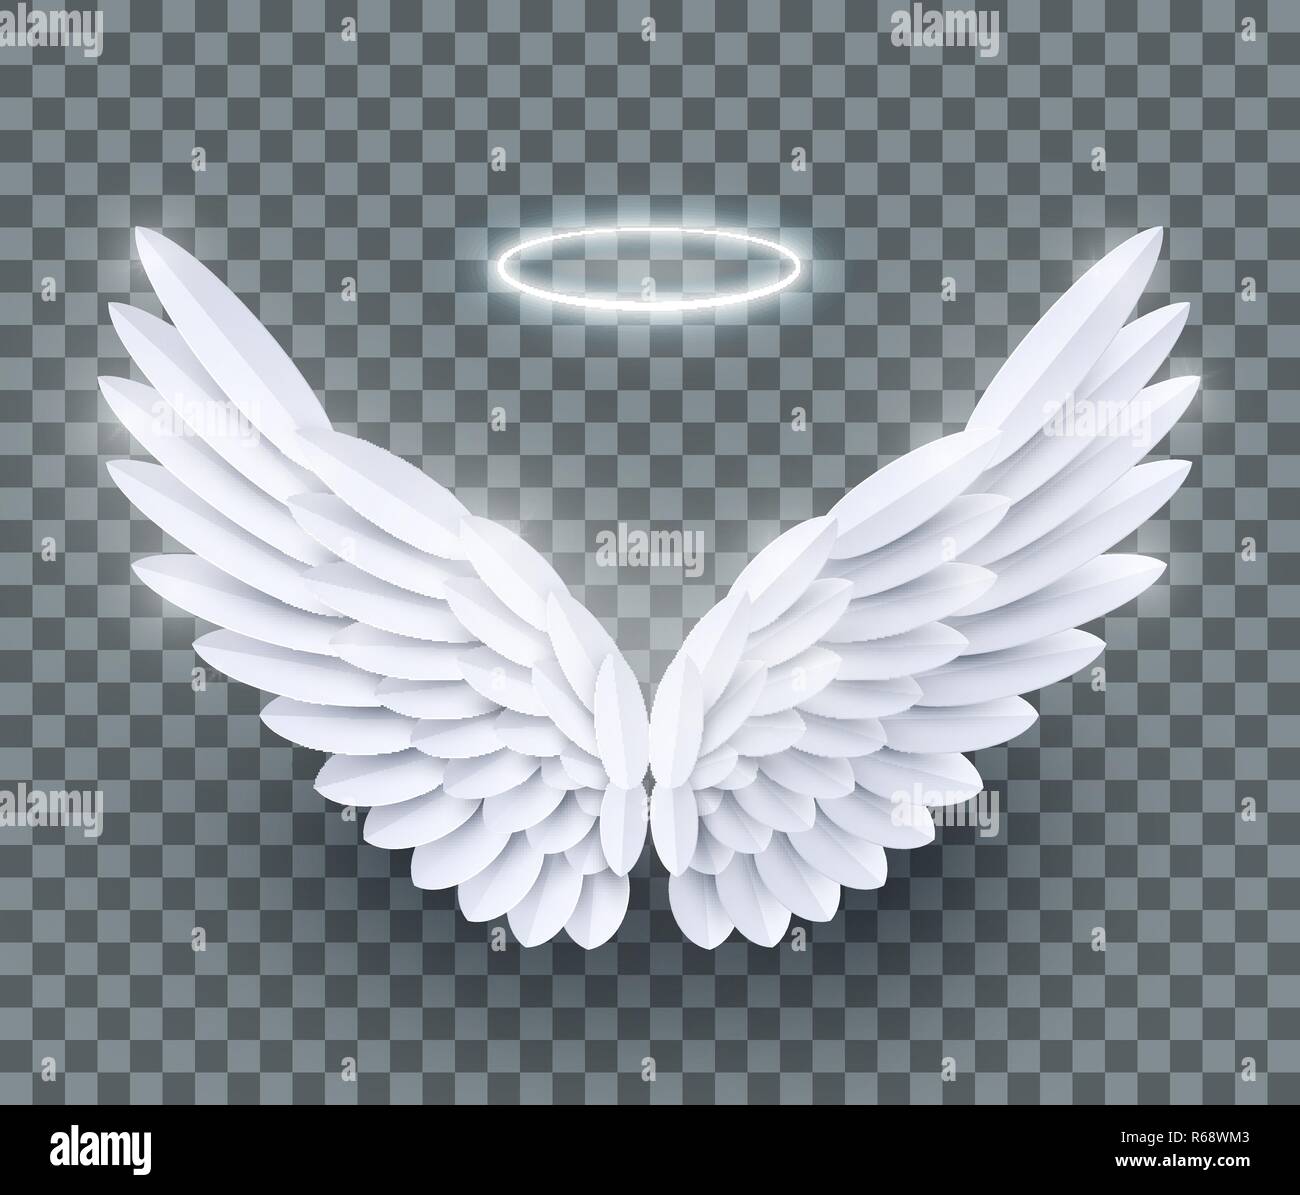 Download Vector 3d white realistic layered paper cut angel wings ...